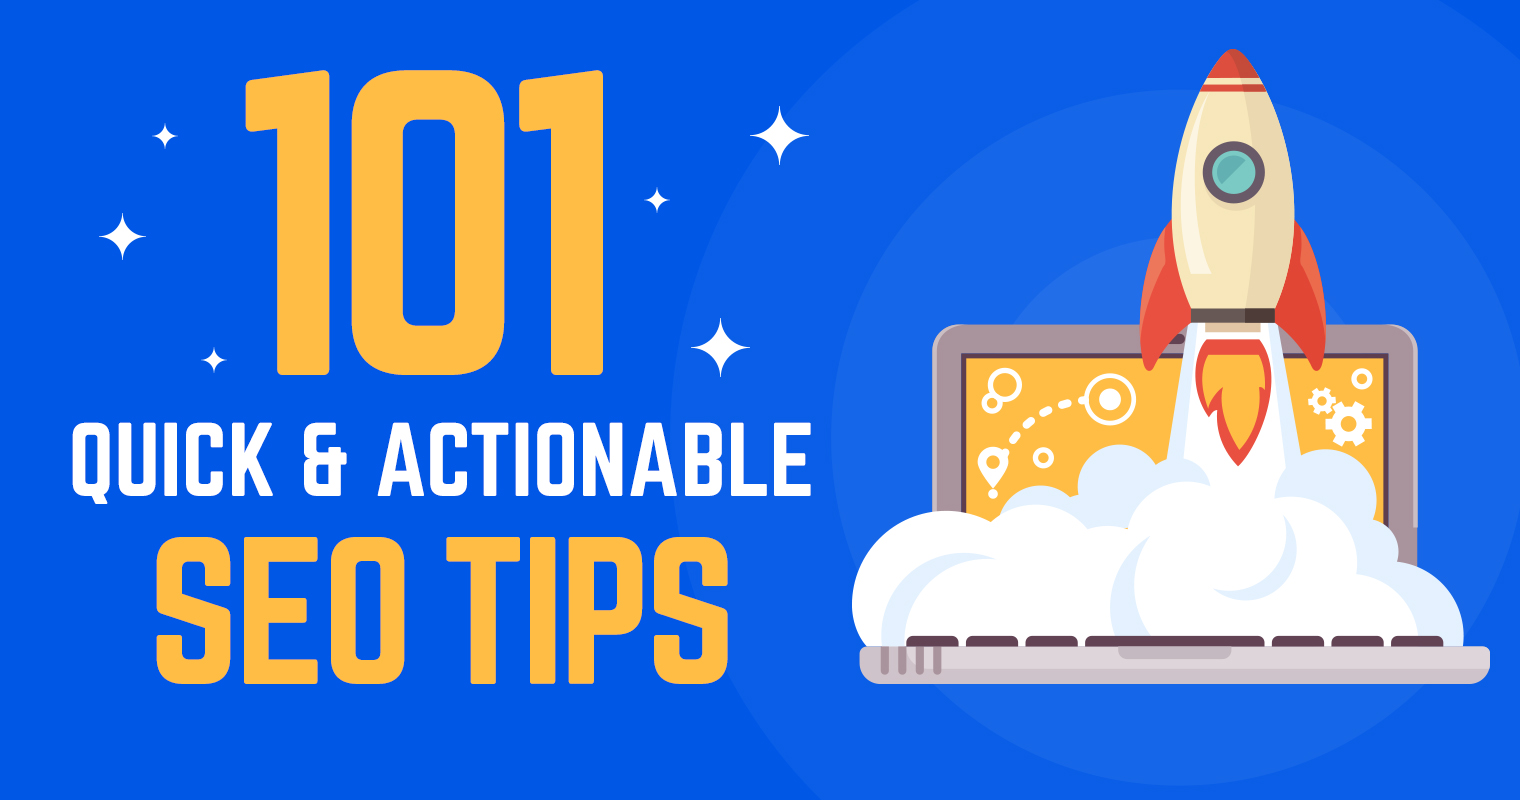 Improving website SEO with these actionable tips